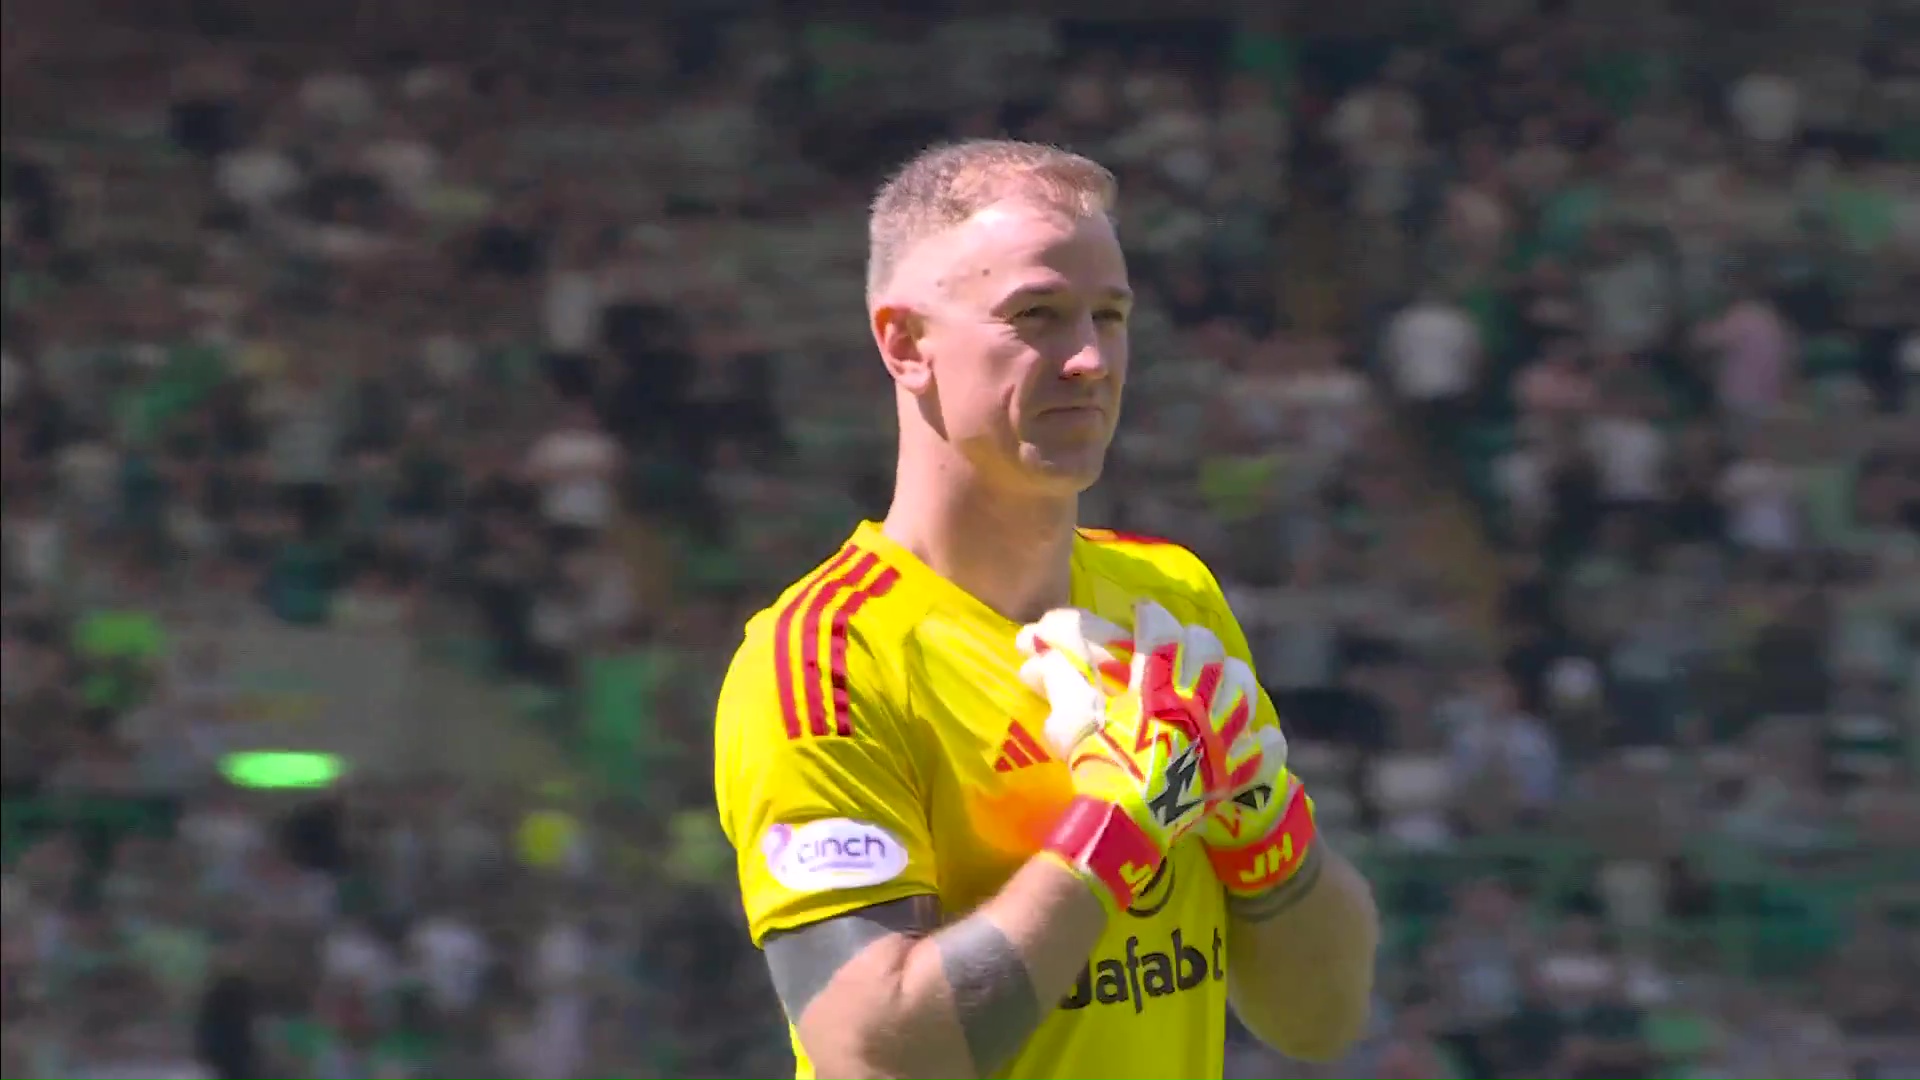 Joe Hart looked emotional as he was honoured by Celtic fans during his last game at Celtic Park